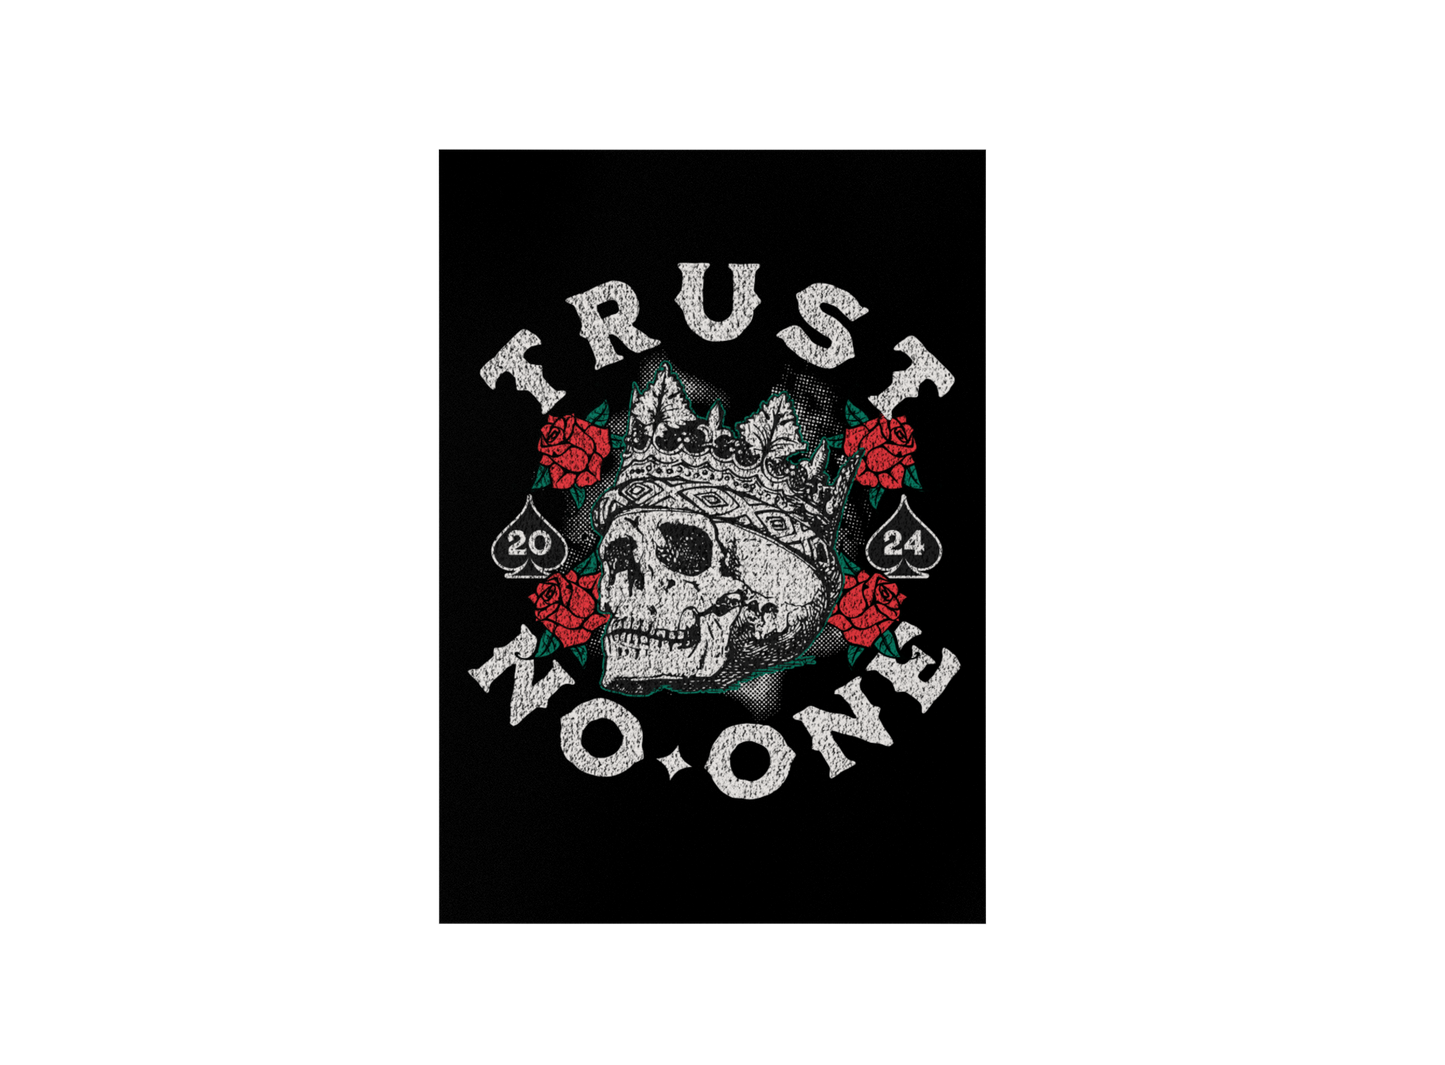 Trust no one - Poster